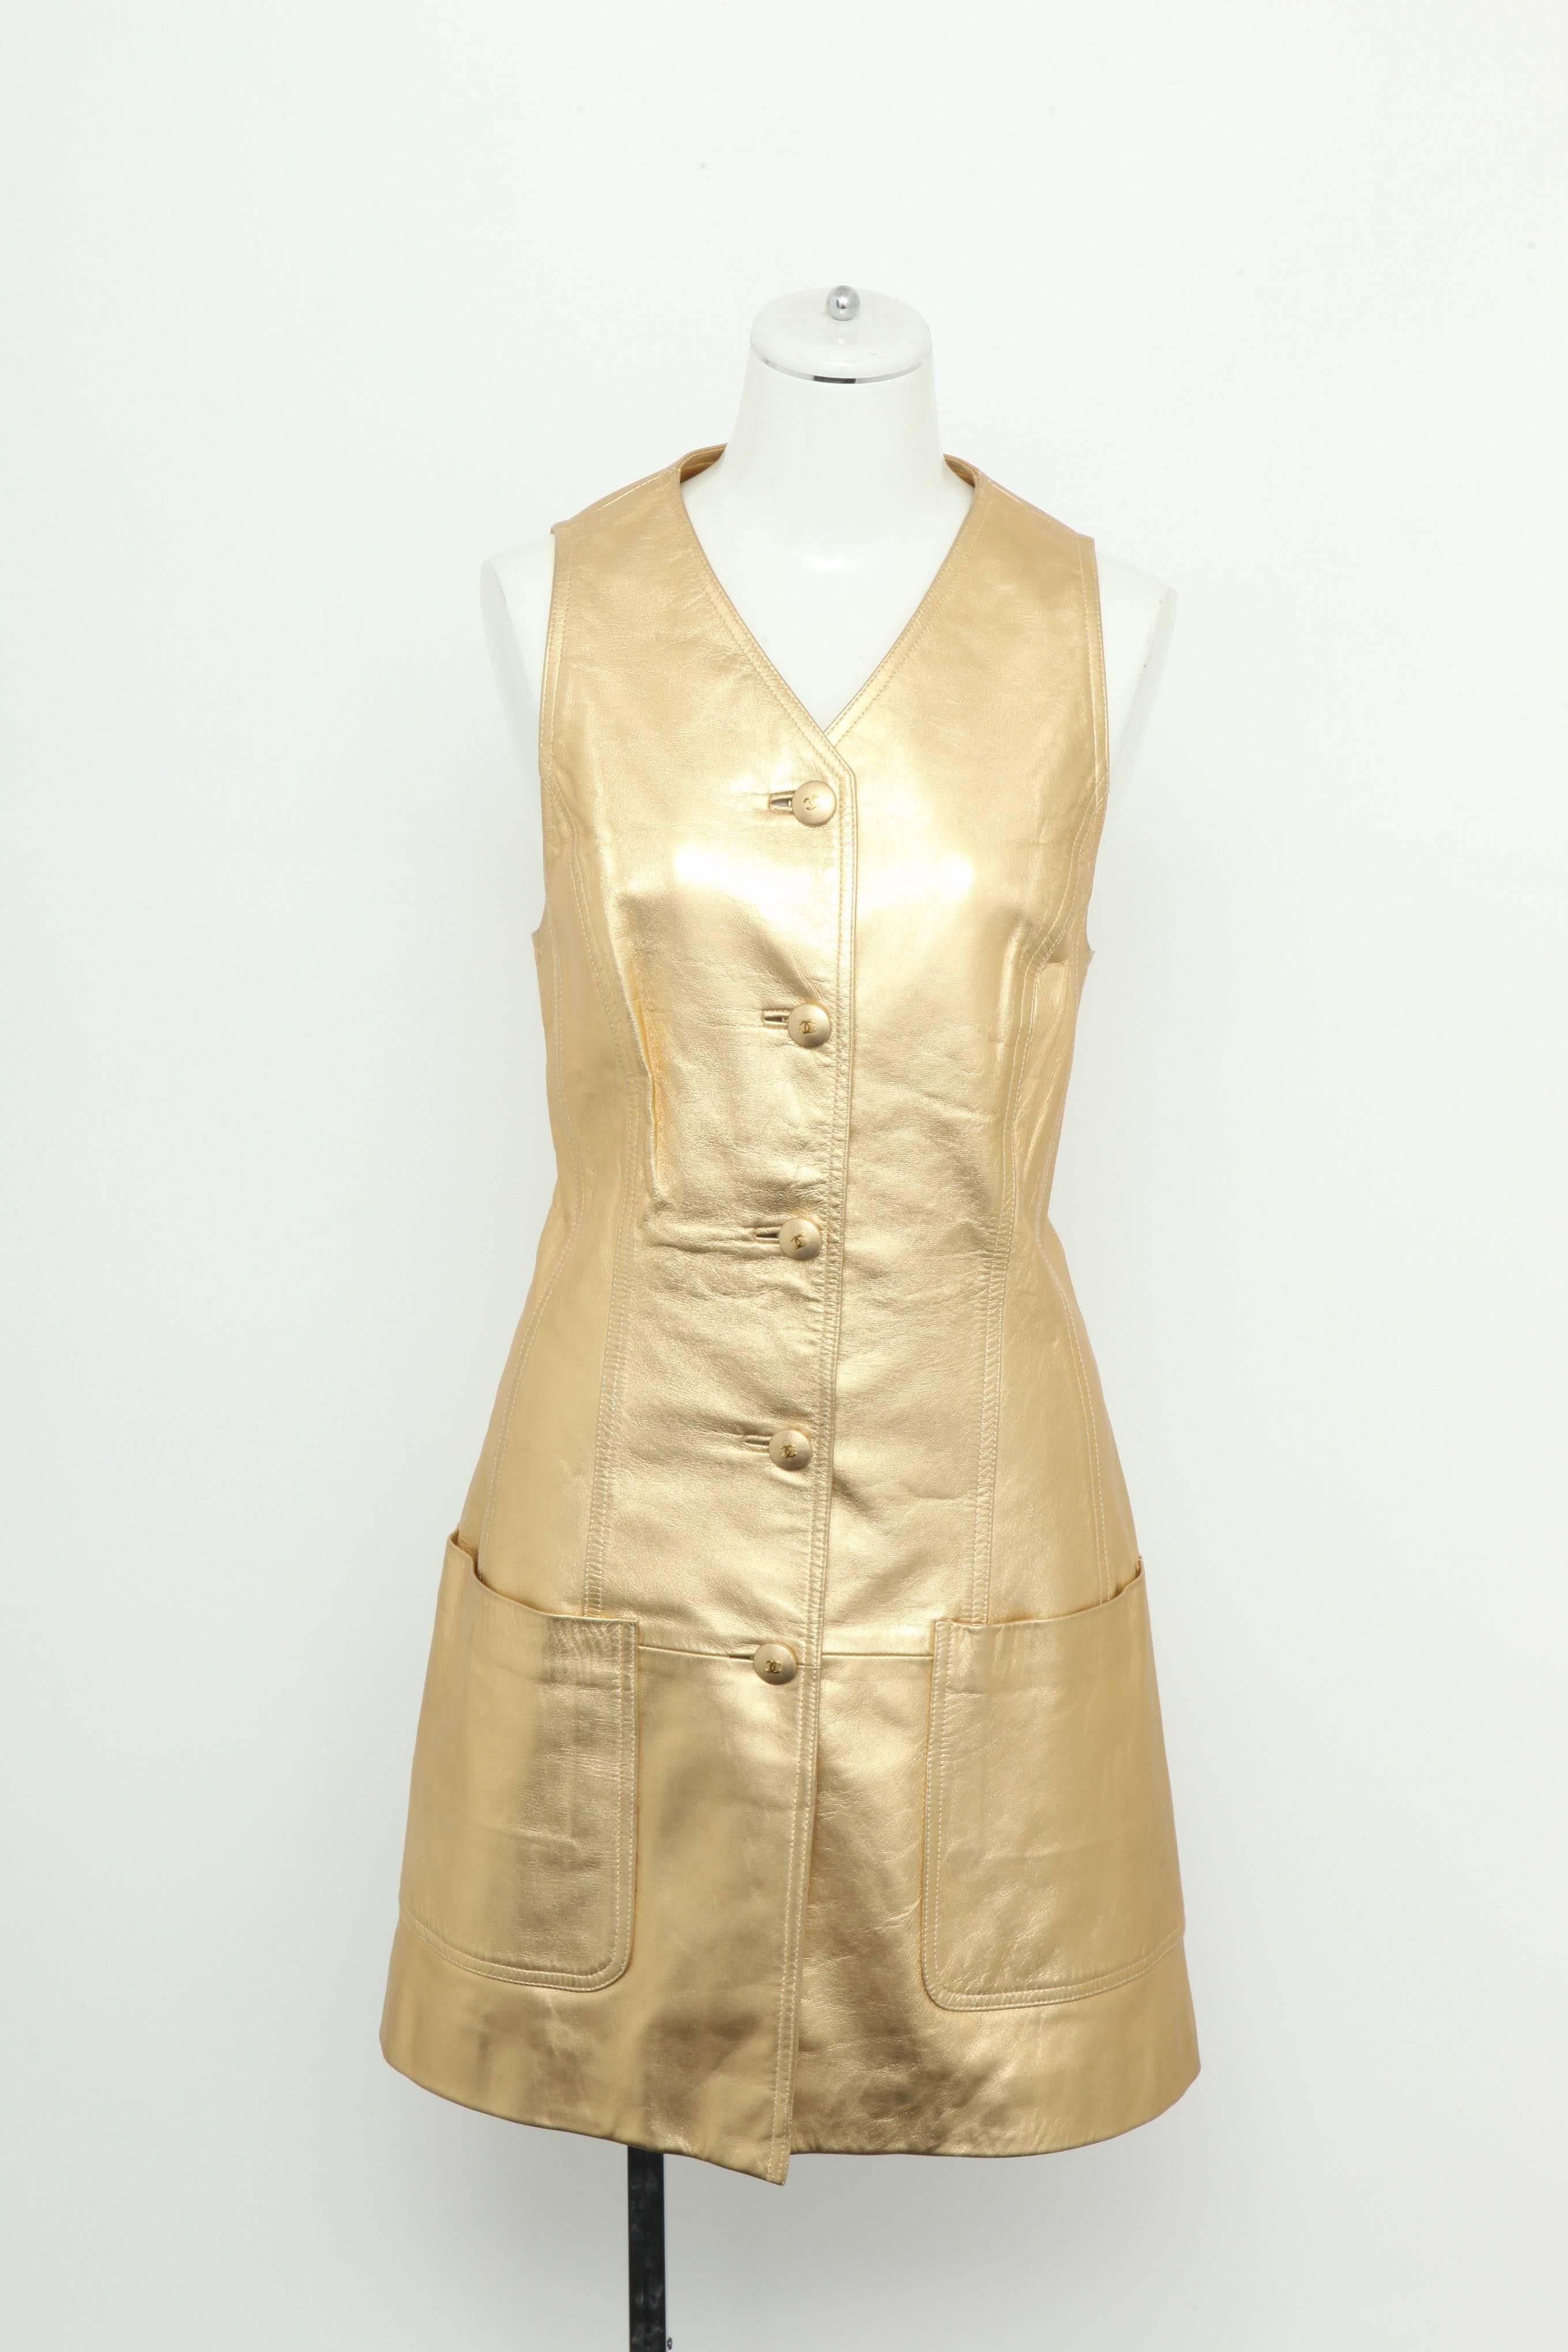 Extremely rare Chanel Gold leather vest dress with CC Buttons. From the 1980's. Belt sold separately.

Size 40
Shoulders: 15 inches
Bust: 14.5 Inches
Waist: 16 Inches
Hip: 32 Inches